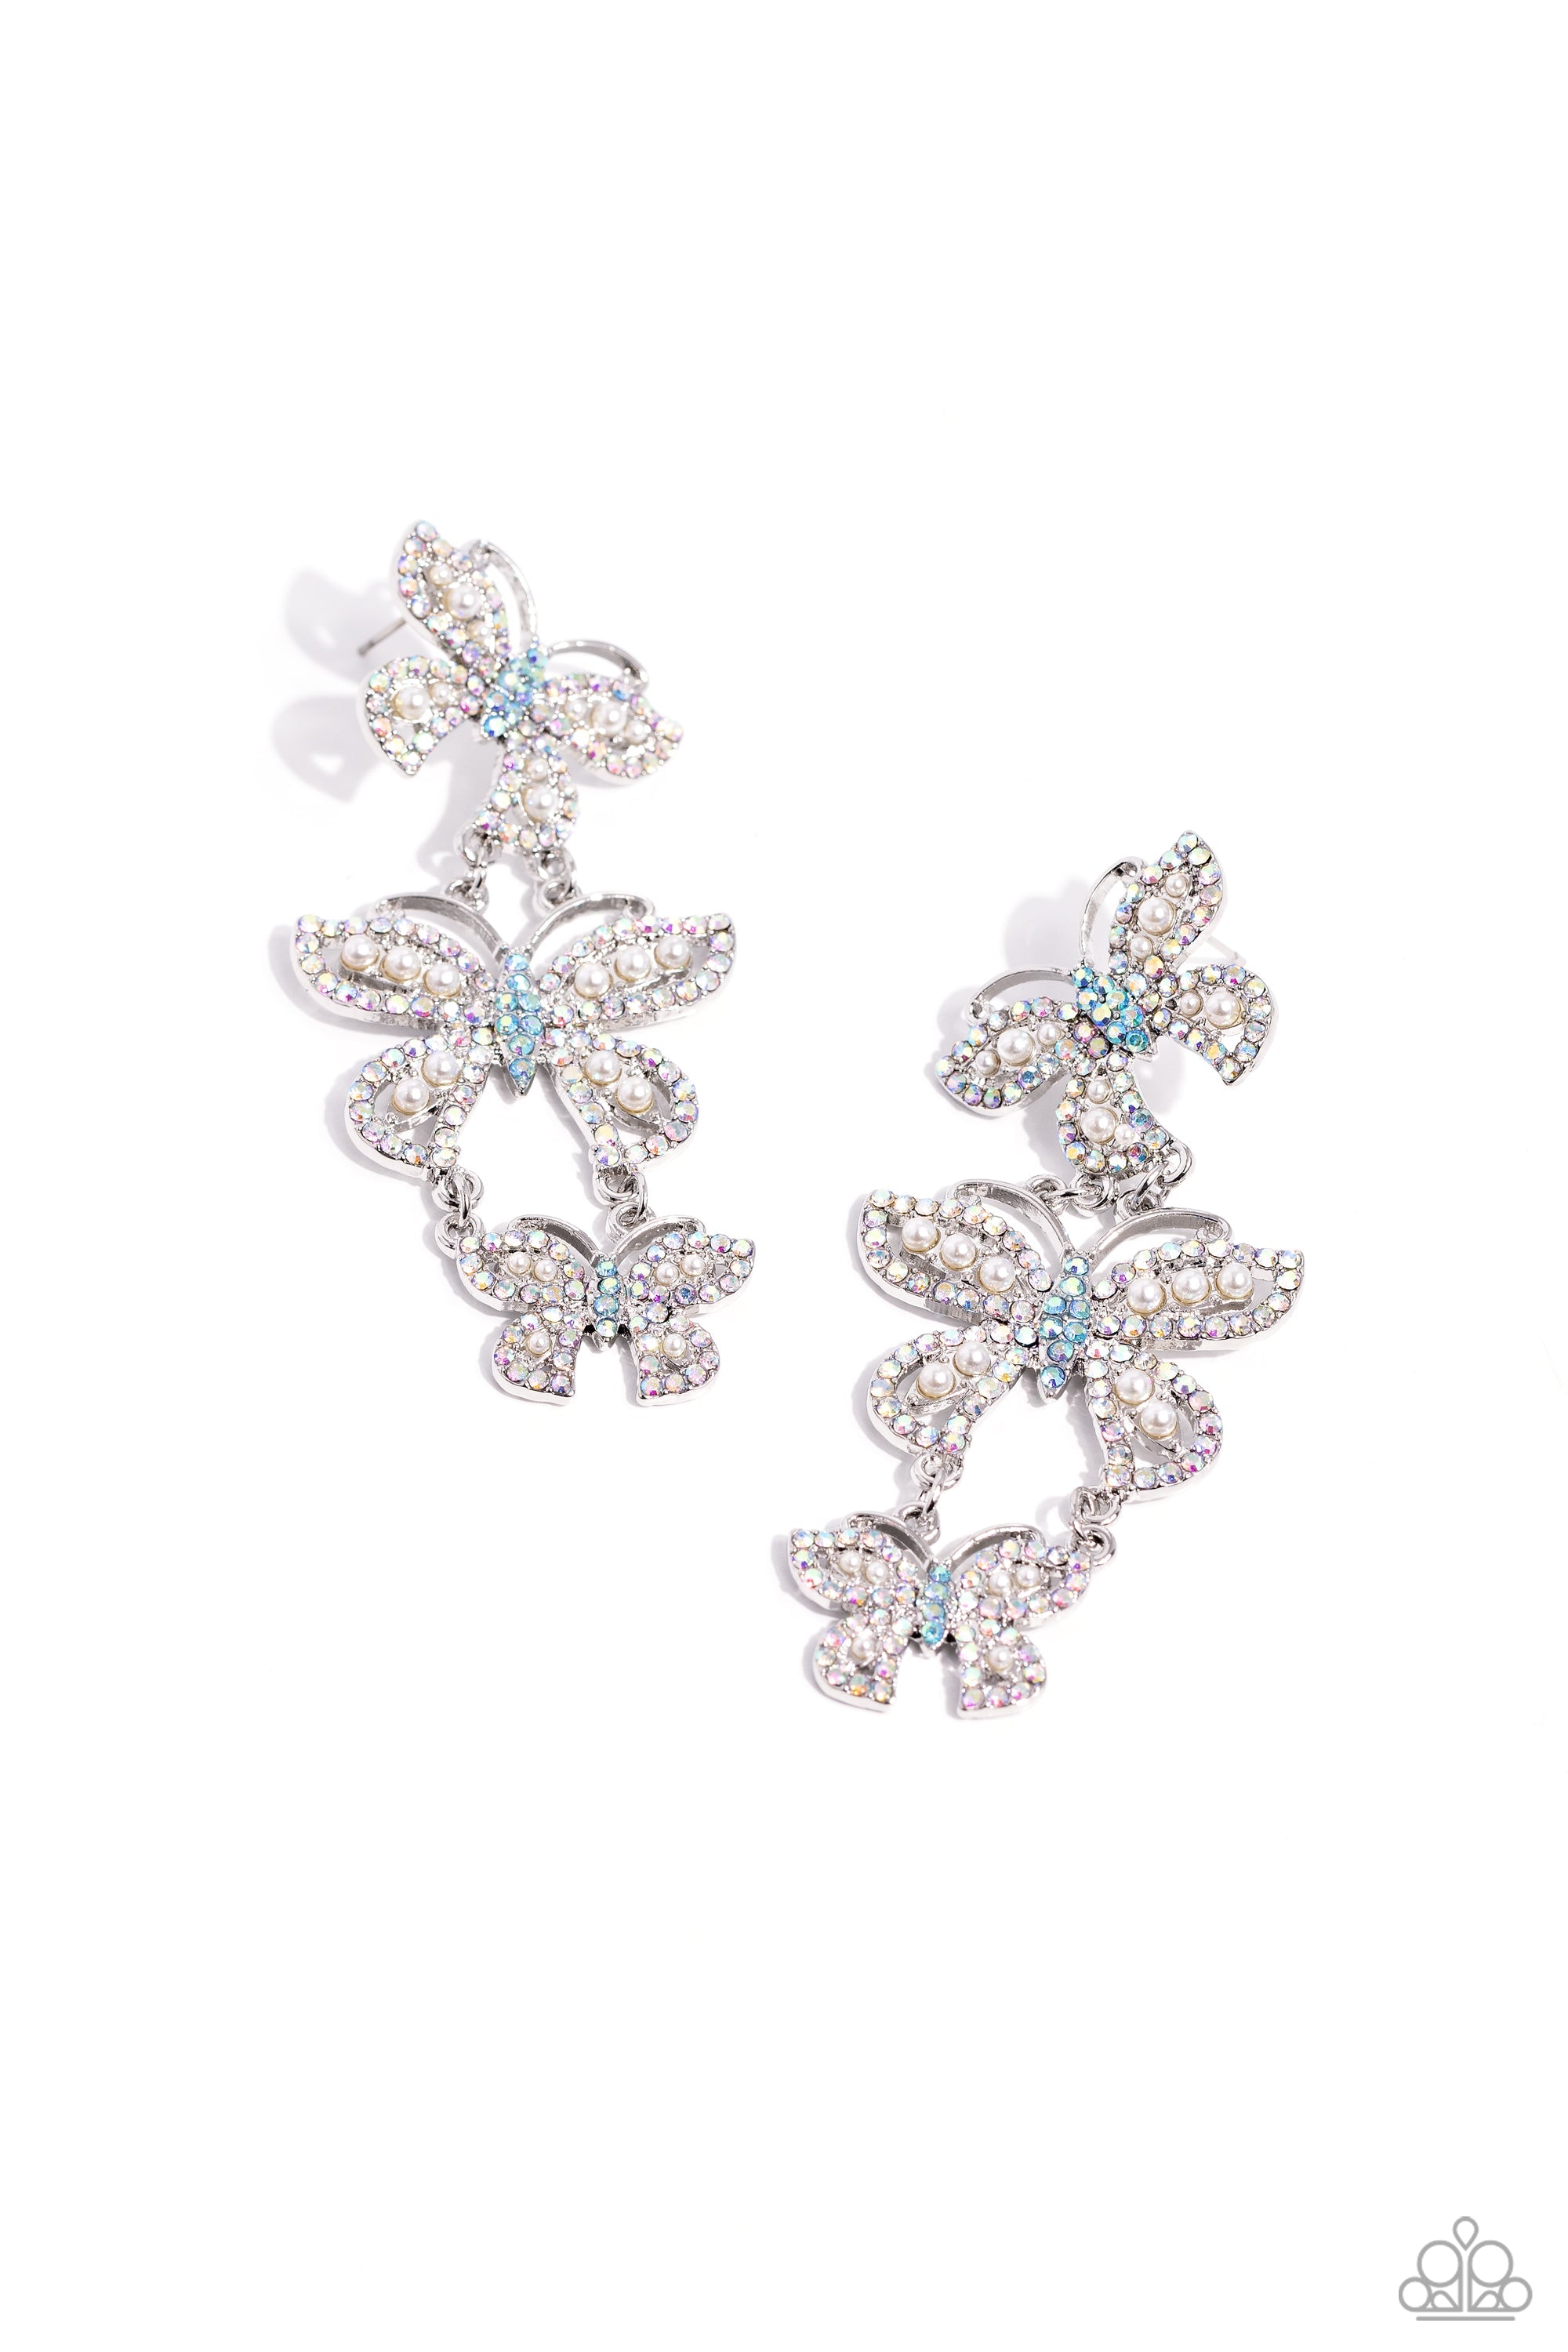 Fluttering Finale Multi Iridescent Rhinestone Butterfly Earrings - Paparazzi Accessories- lightbox - CarasShop.com - $5 Jewelry by Cara Jewels